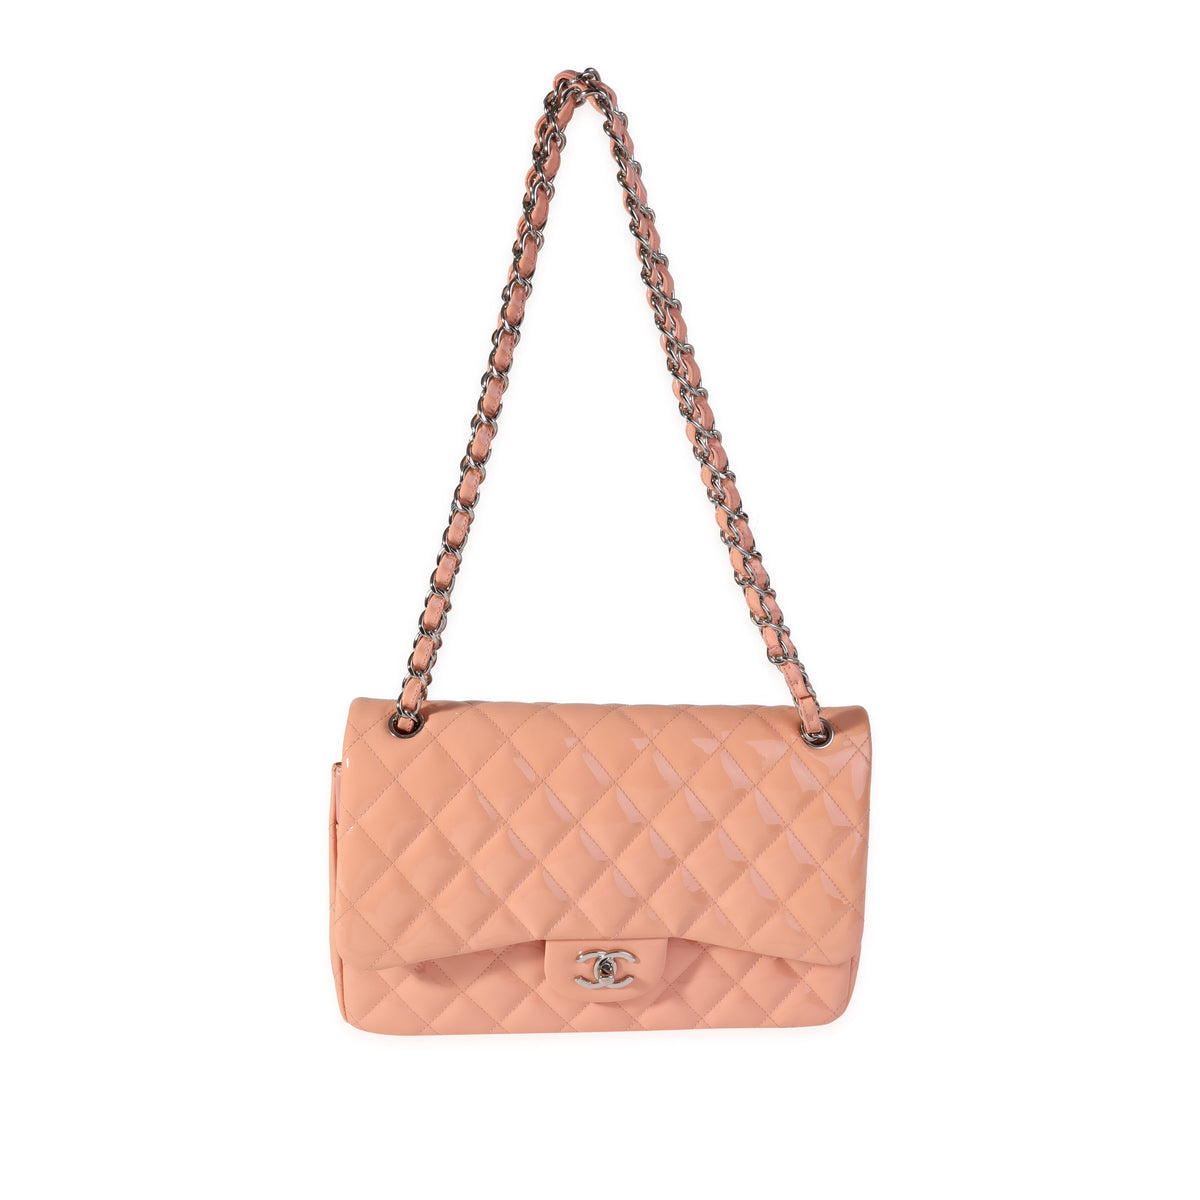 Chanel Salmon Pink Quilted Patent Leather Jumbo Classic Double Flap Bag, myGemma, NL